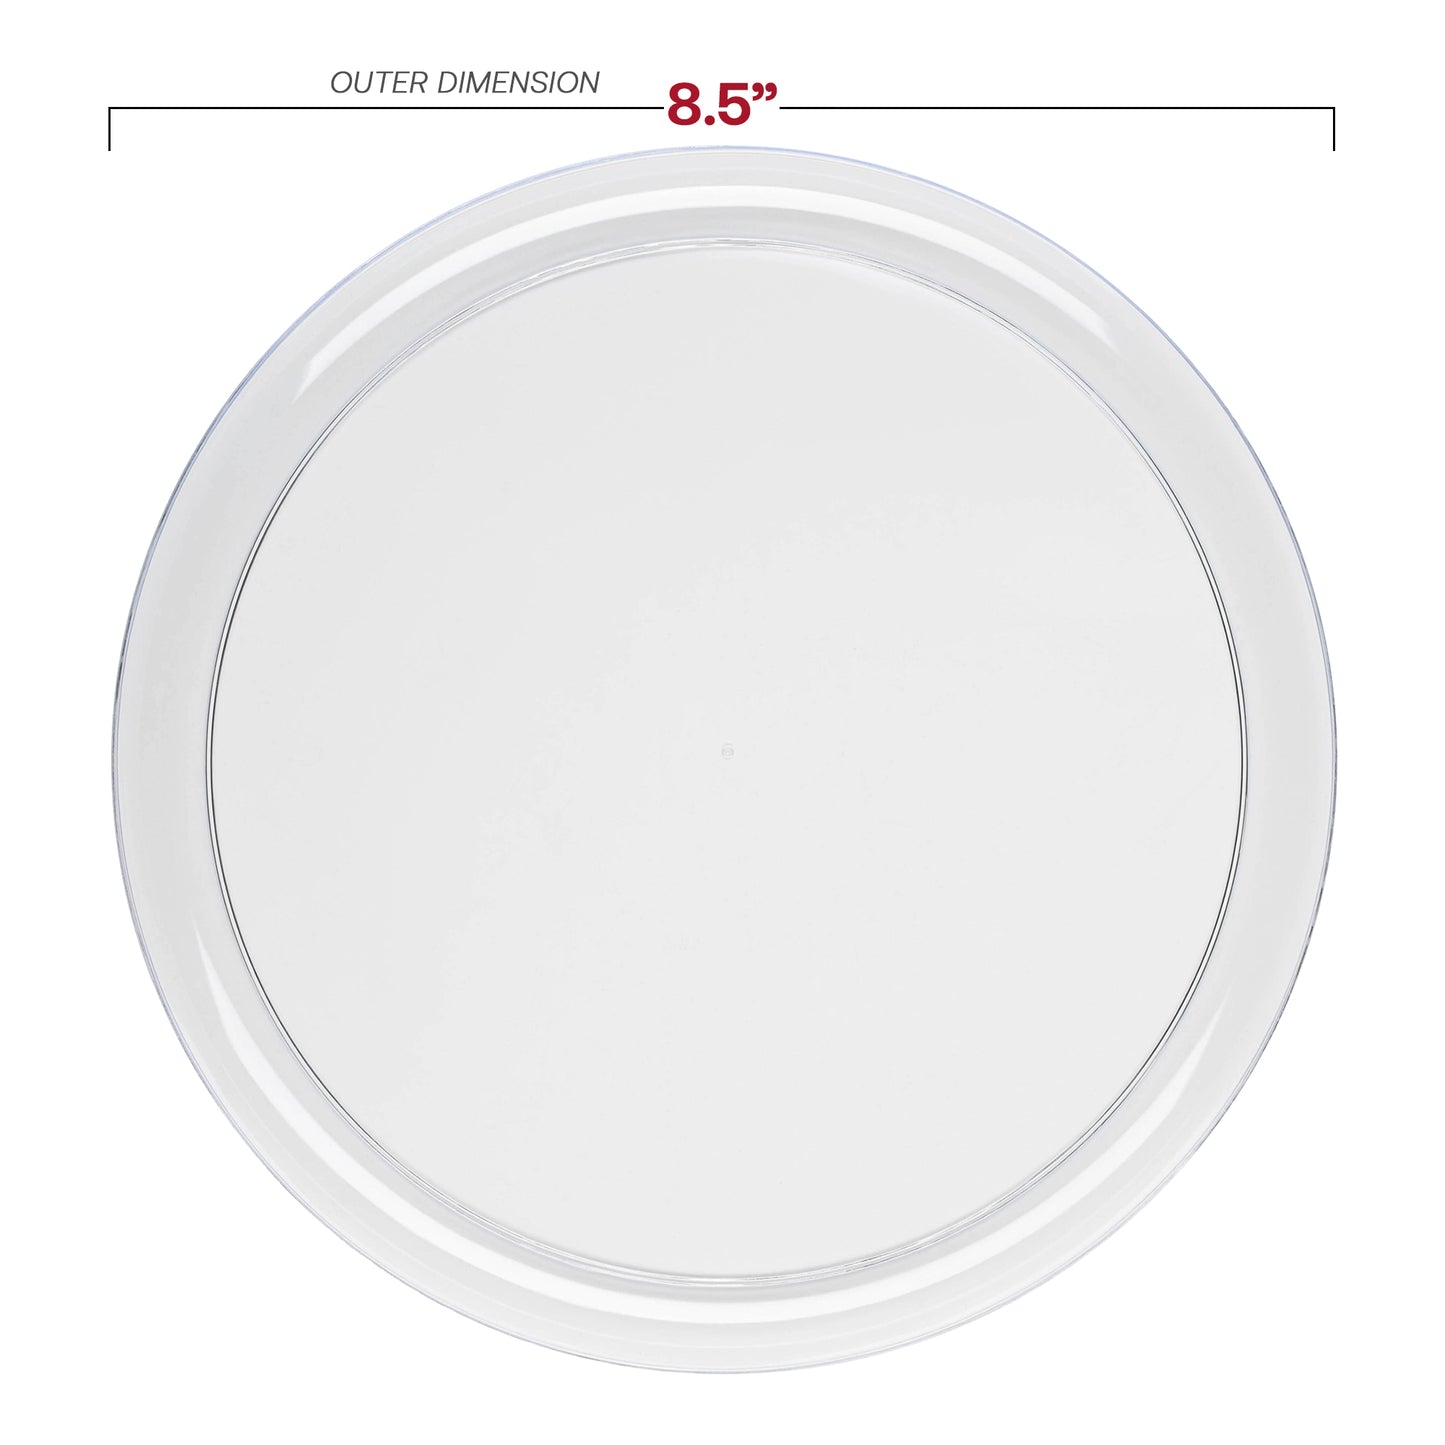 Clear Flat Round Disposable Plastic Appetizer/Salad Plates (8.5") Dimension | The Kaya Collection